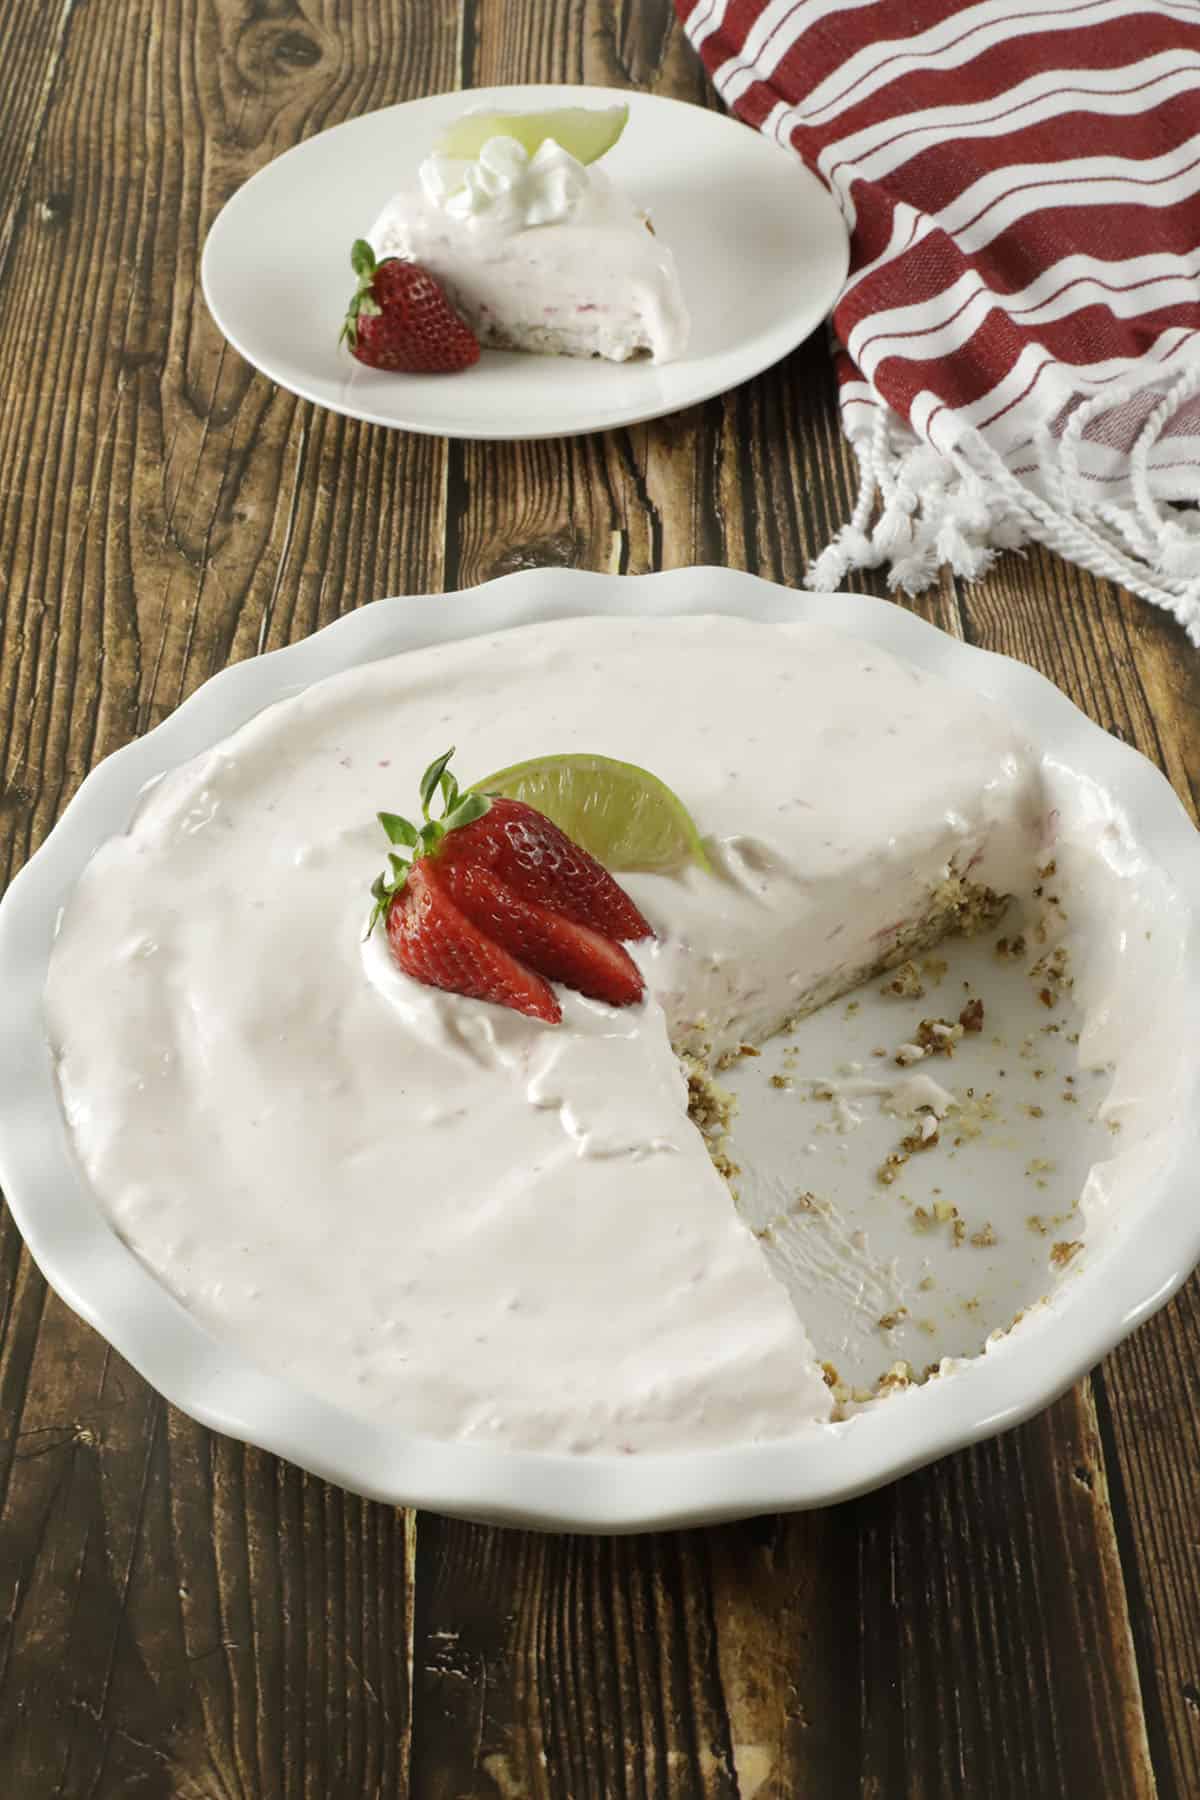 Whole pie with slice removed, exposing pretzel crust, in a white fluted pie dish garnished with lime wedges and strawberry slices.